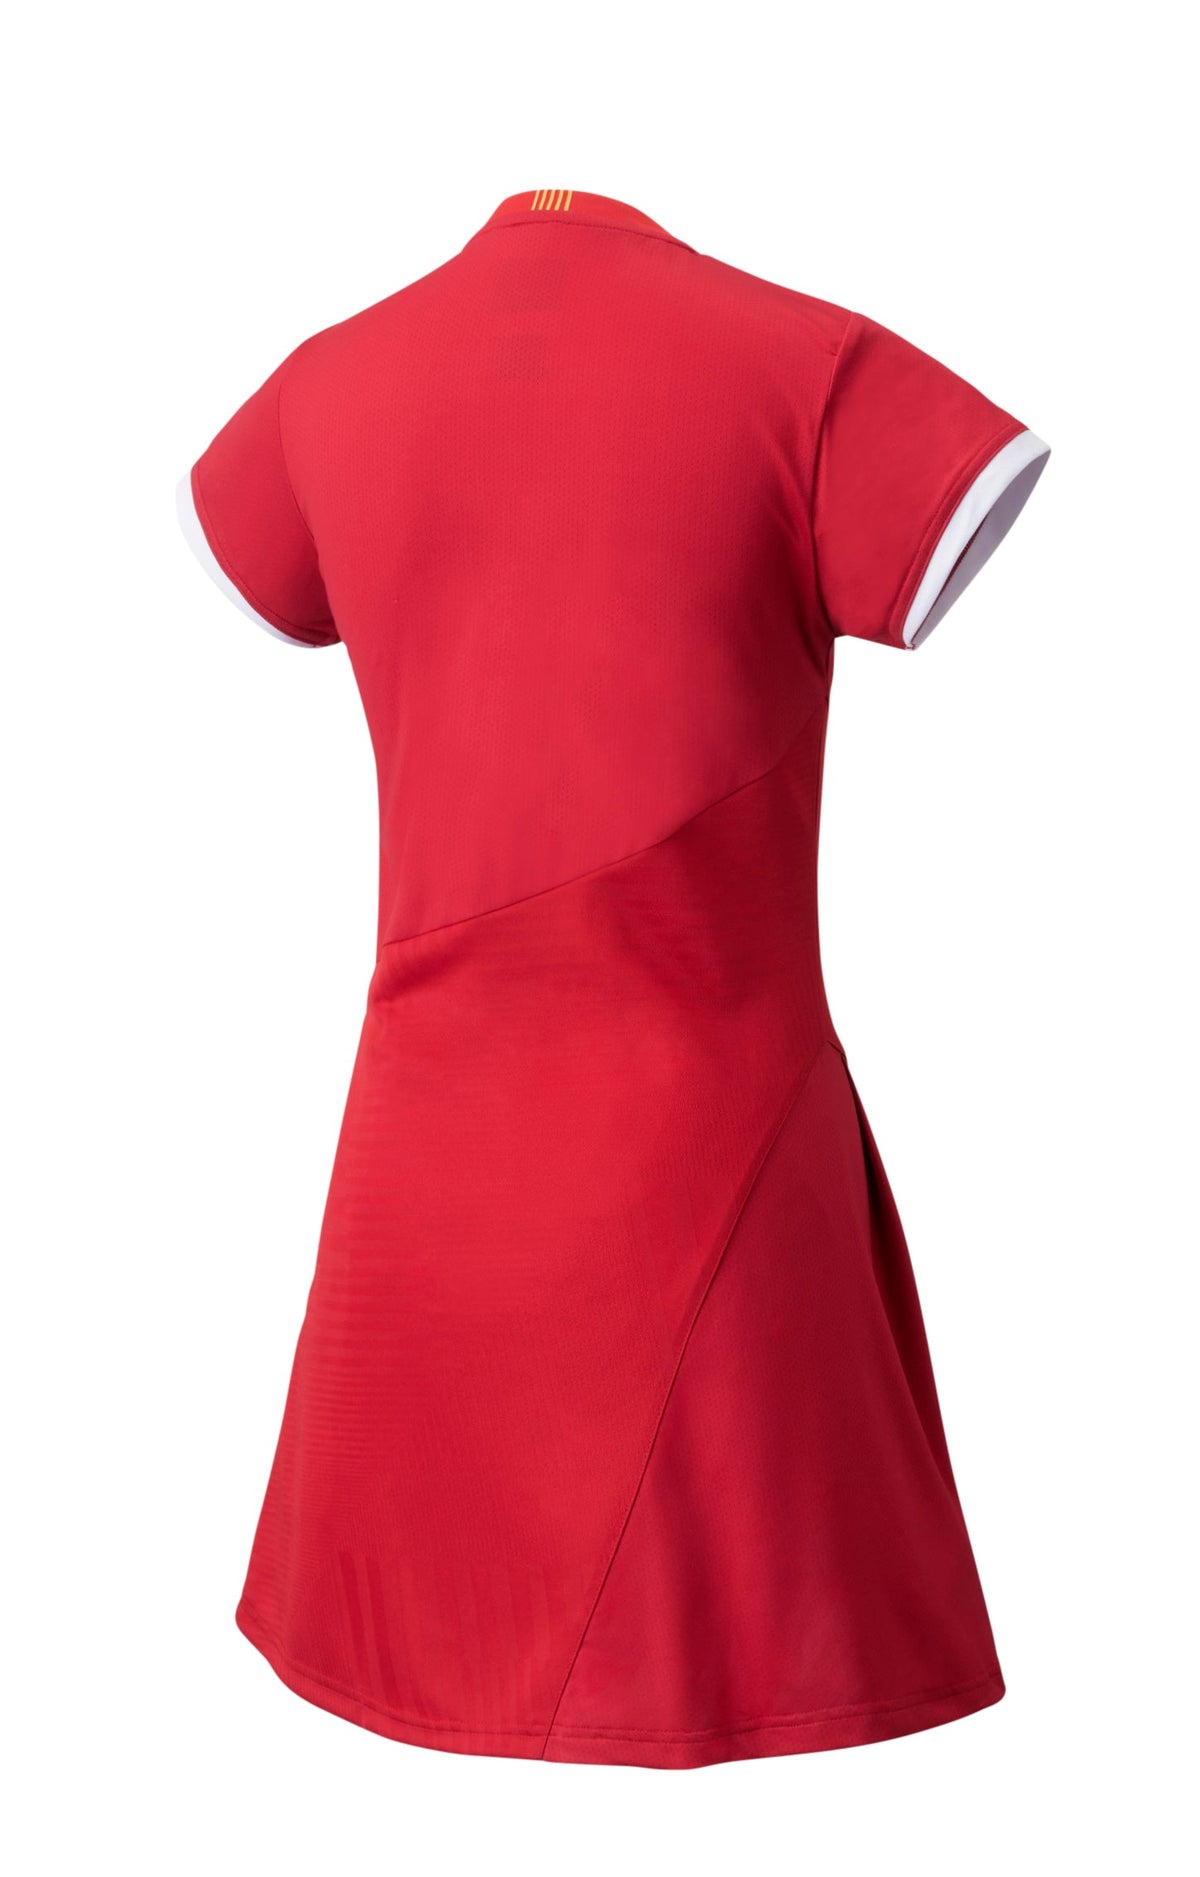 YONEX 20710EX DRESS(WITH INNER SHORTS) Team China (Ruby Red)